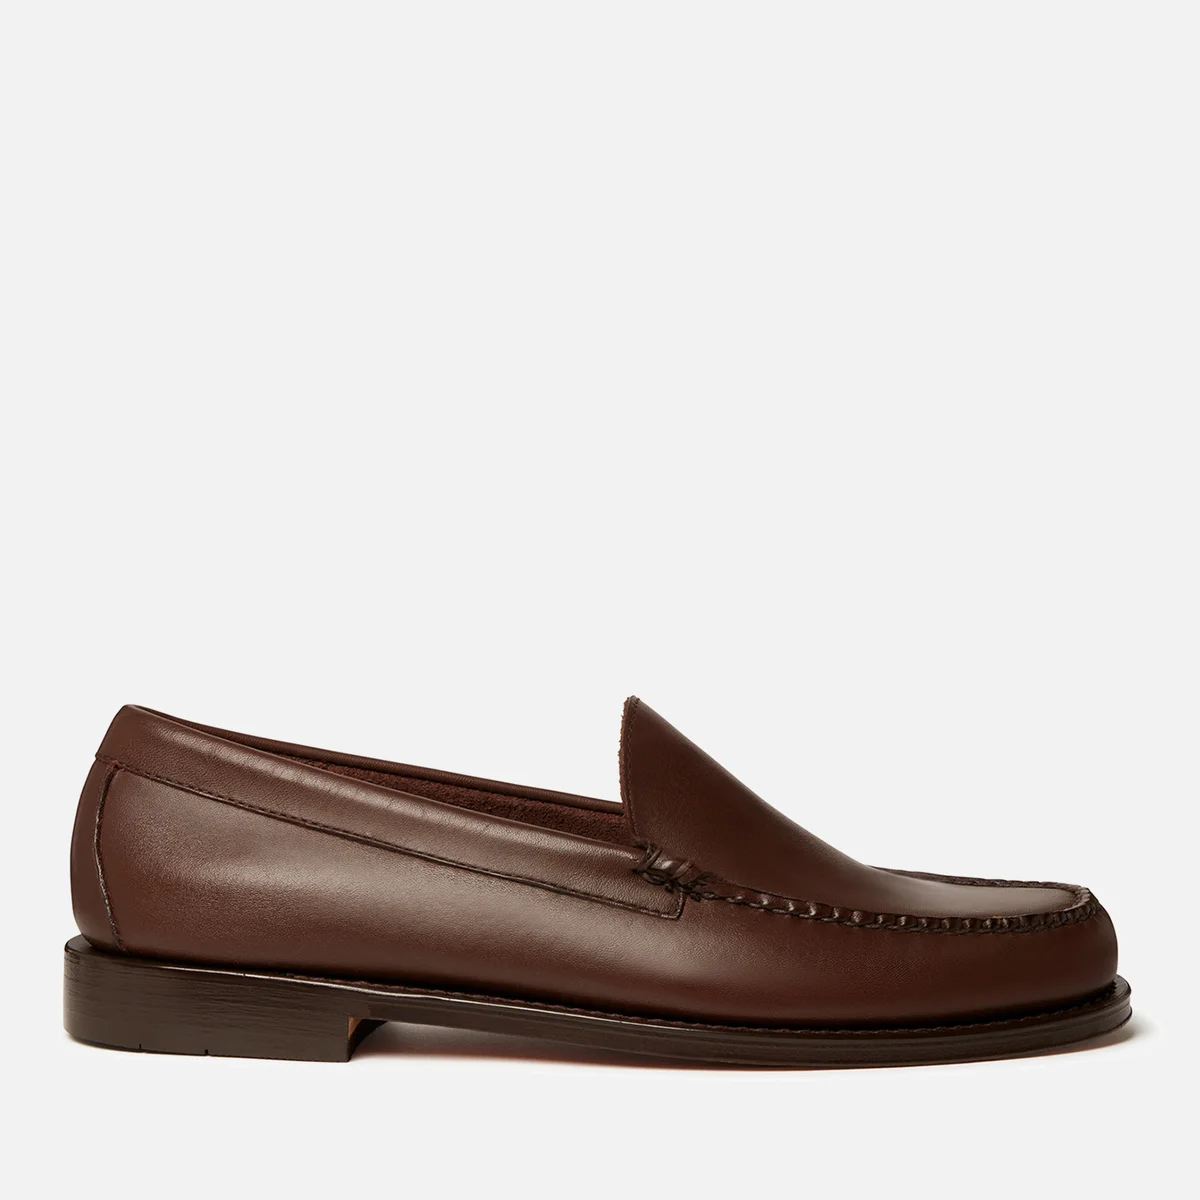 G.H Bass Men's Venetian Leather Loafers Image 1